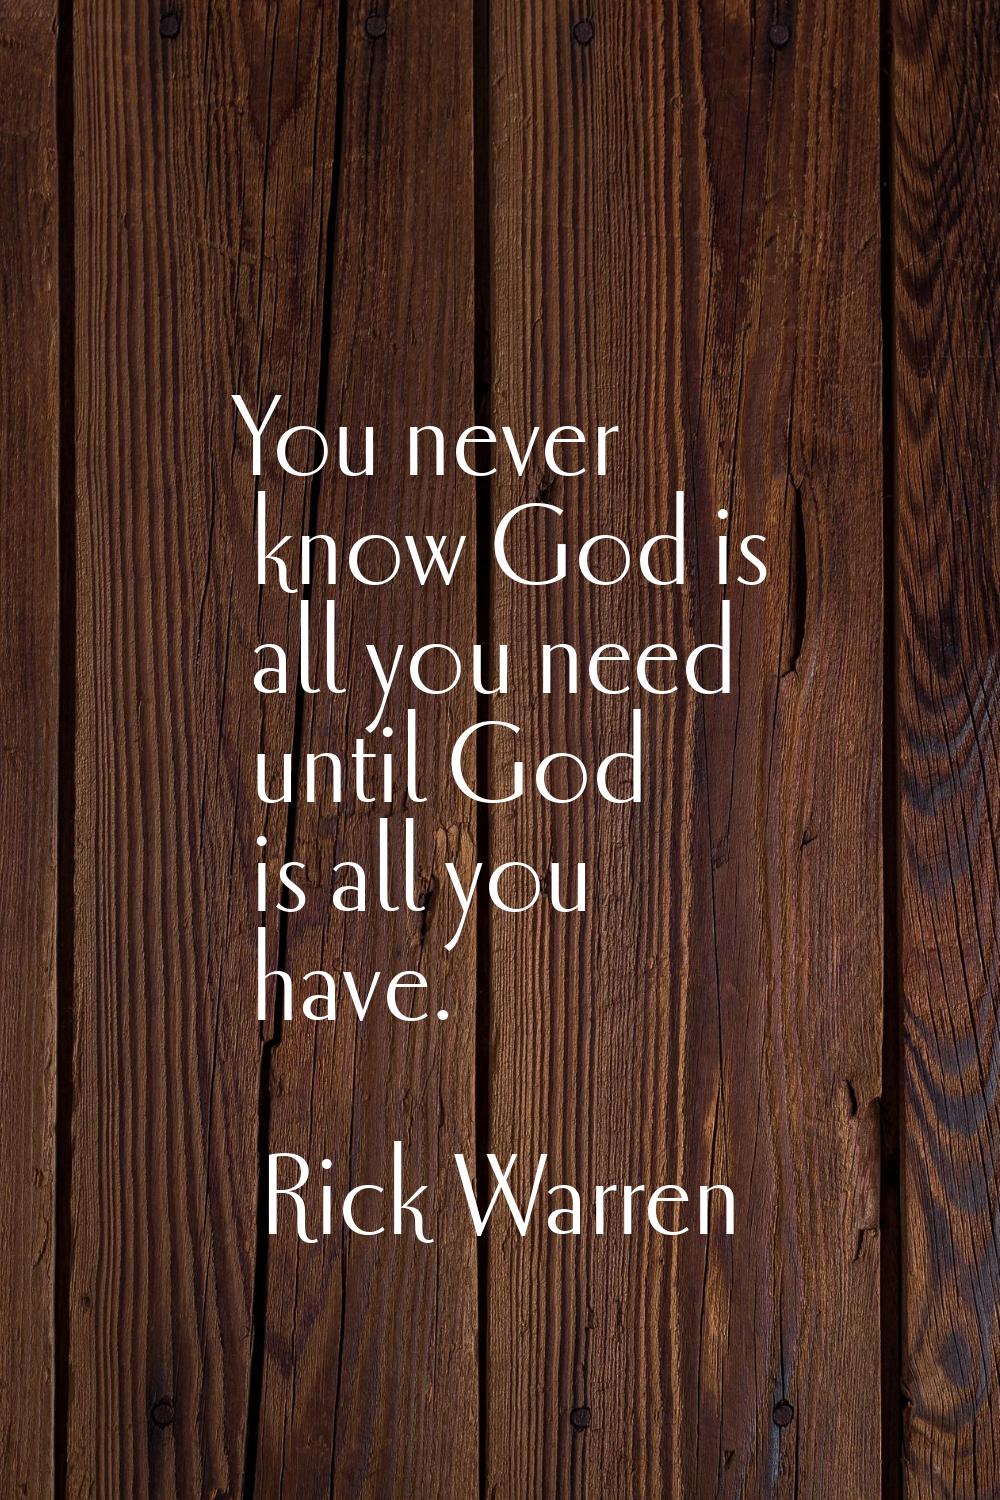 You never know God is all you need until God is all you have.